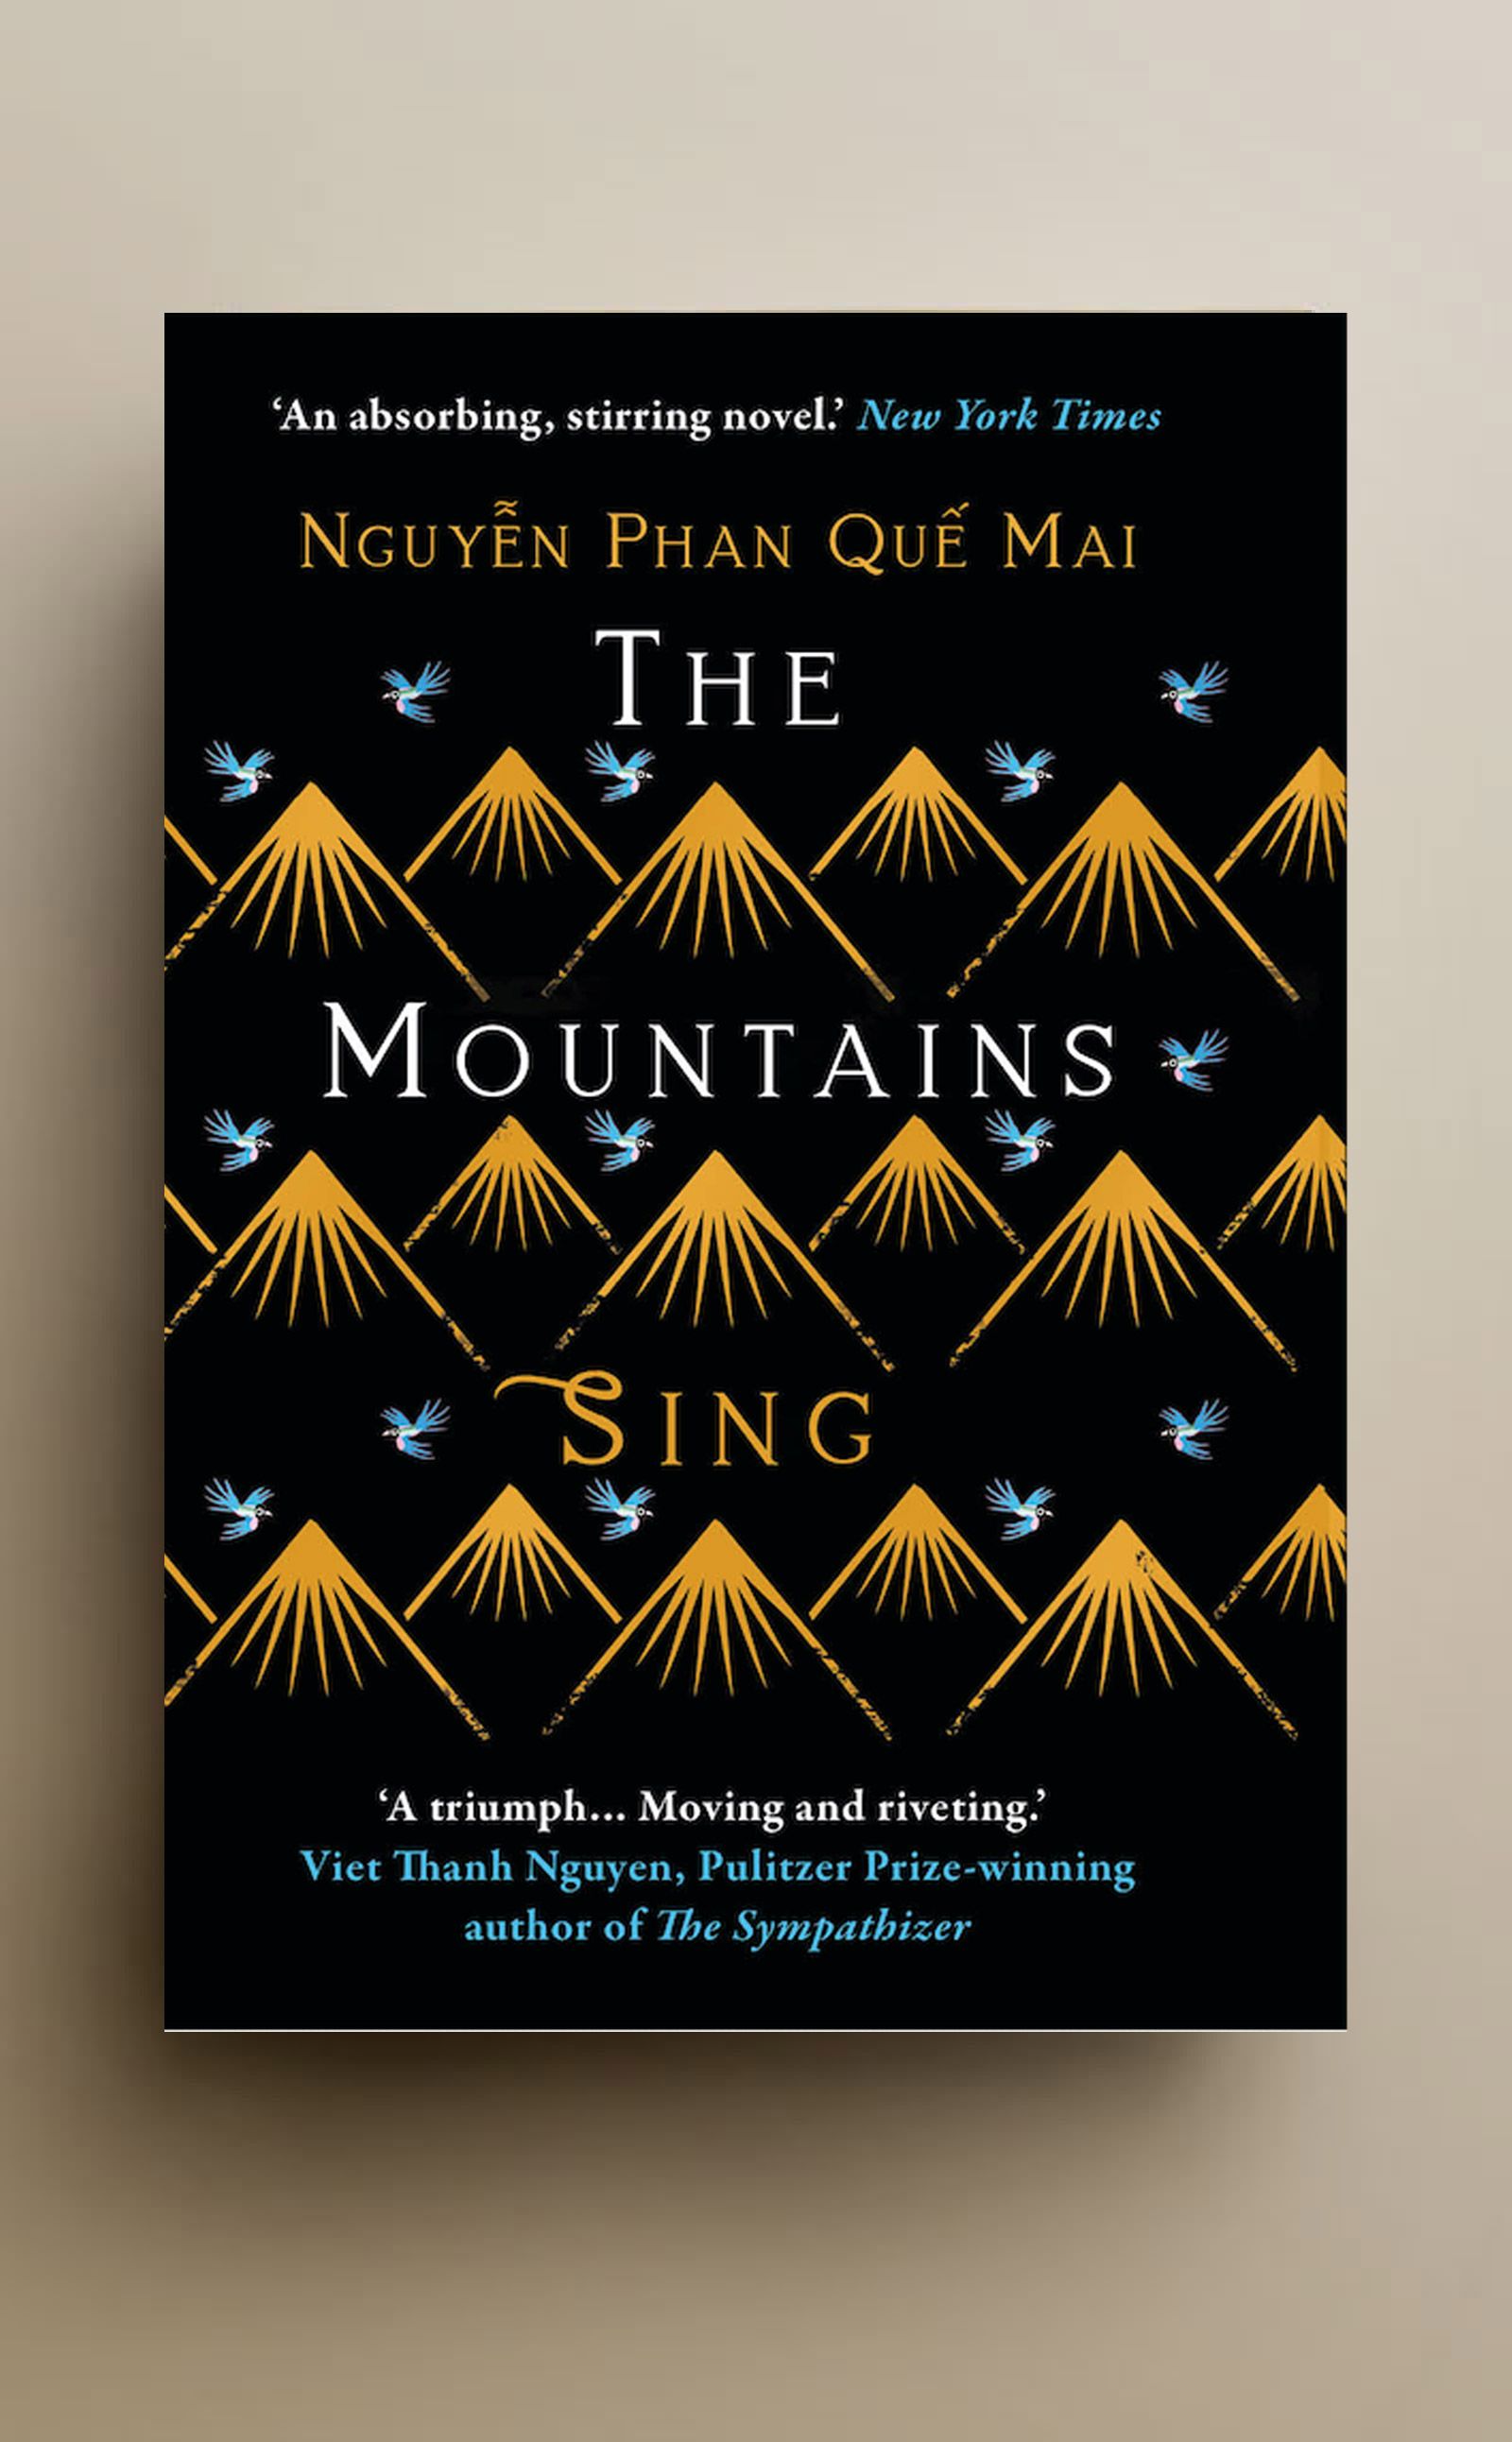 The Mountains Sing (UK/Commonwealth edition, Oneworld, 20 August 2020)